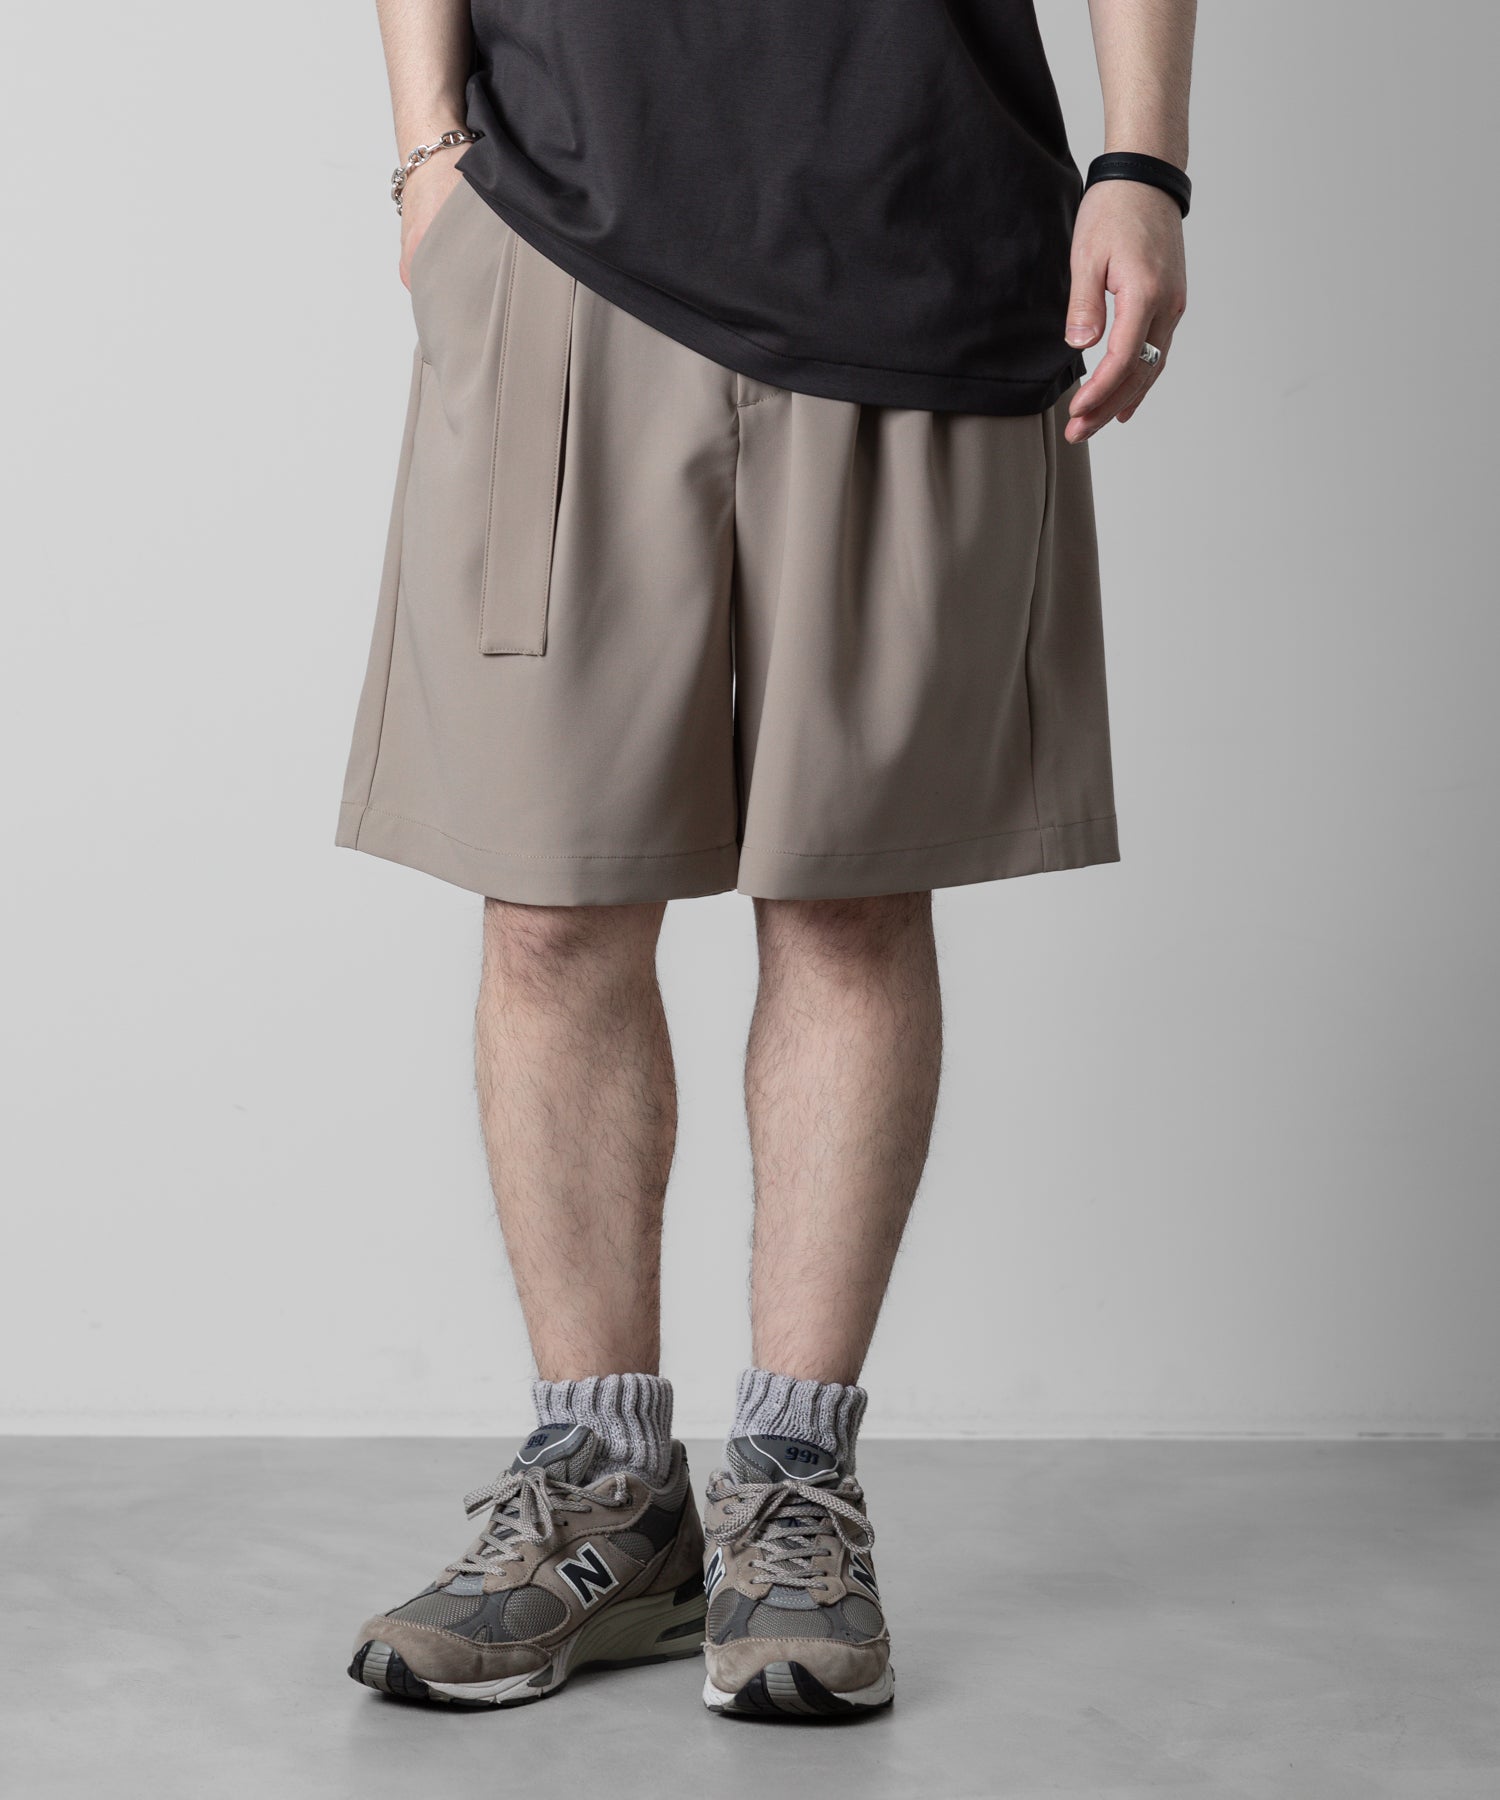 【ATTACHMENT】ATTACHMENT アタッチメントのPE COMPACT TWILL BELTED SHORTS - BEIGE 公式通販サイトsession福岡セレクトショップ